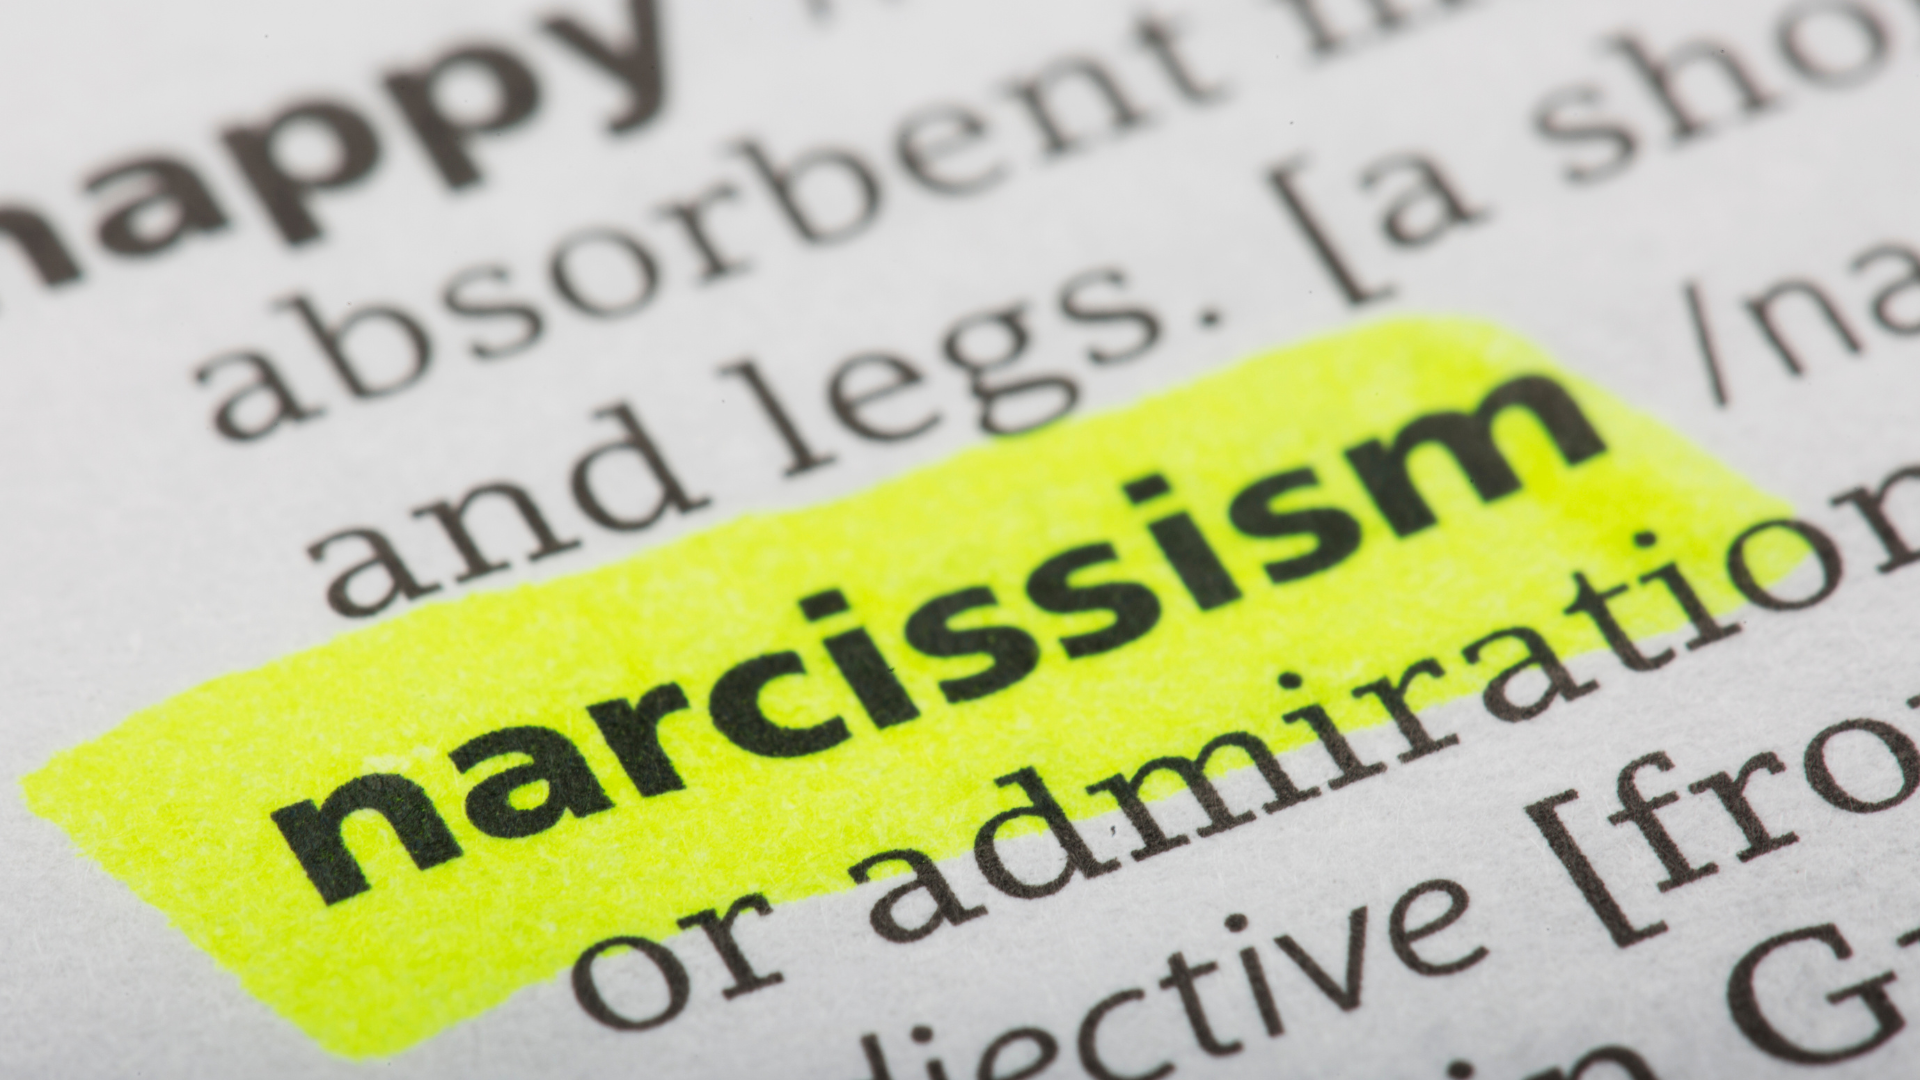 what is narcissism dictionary meaning